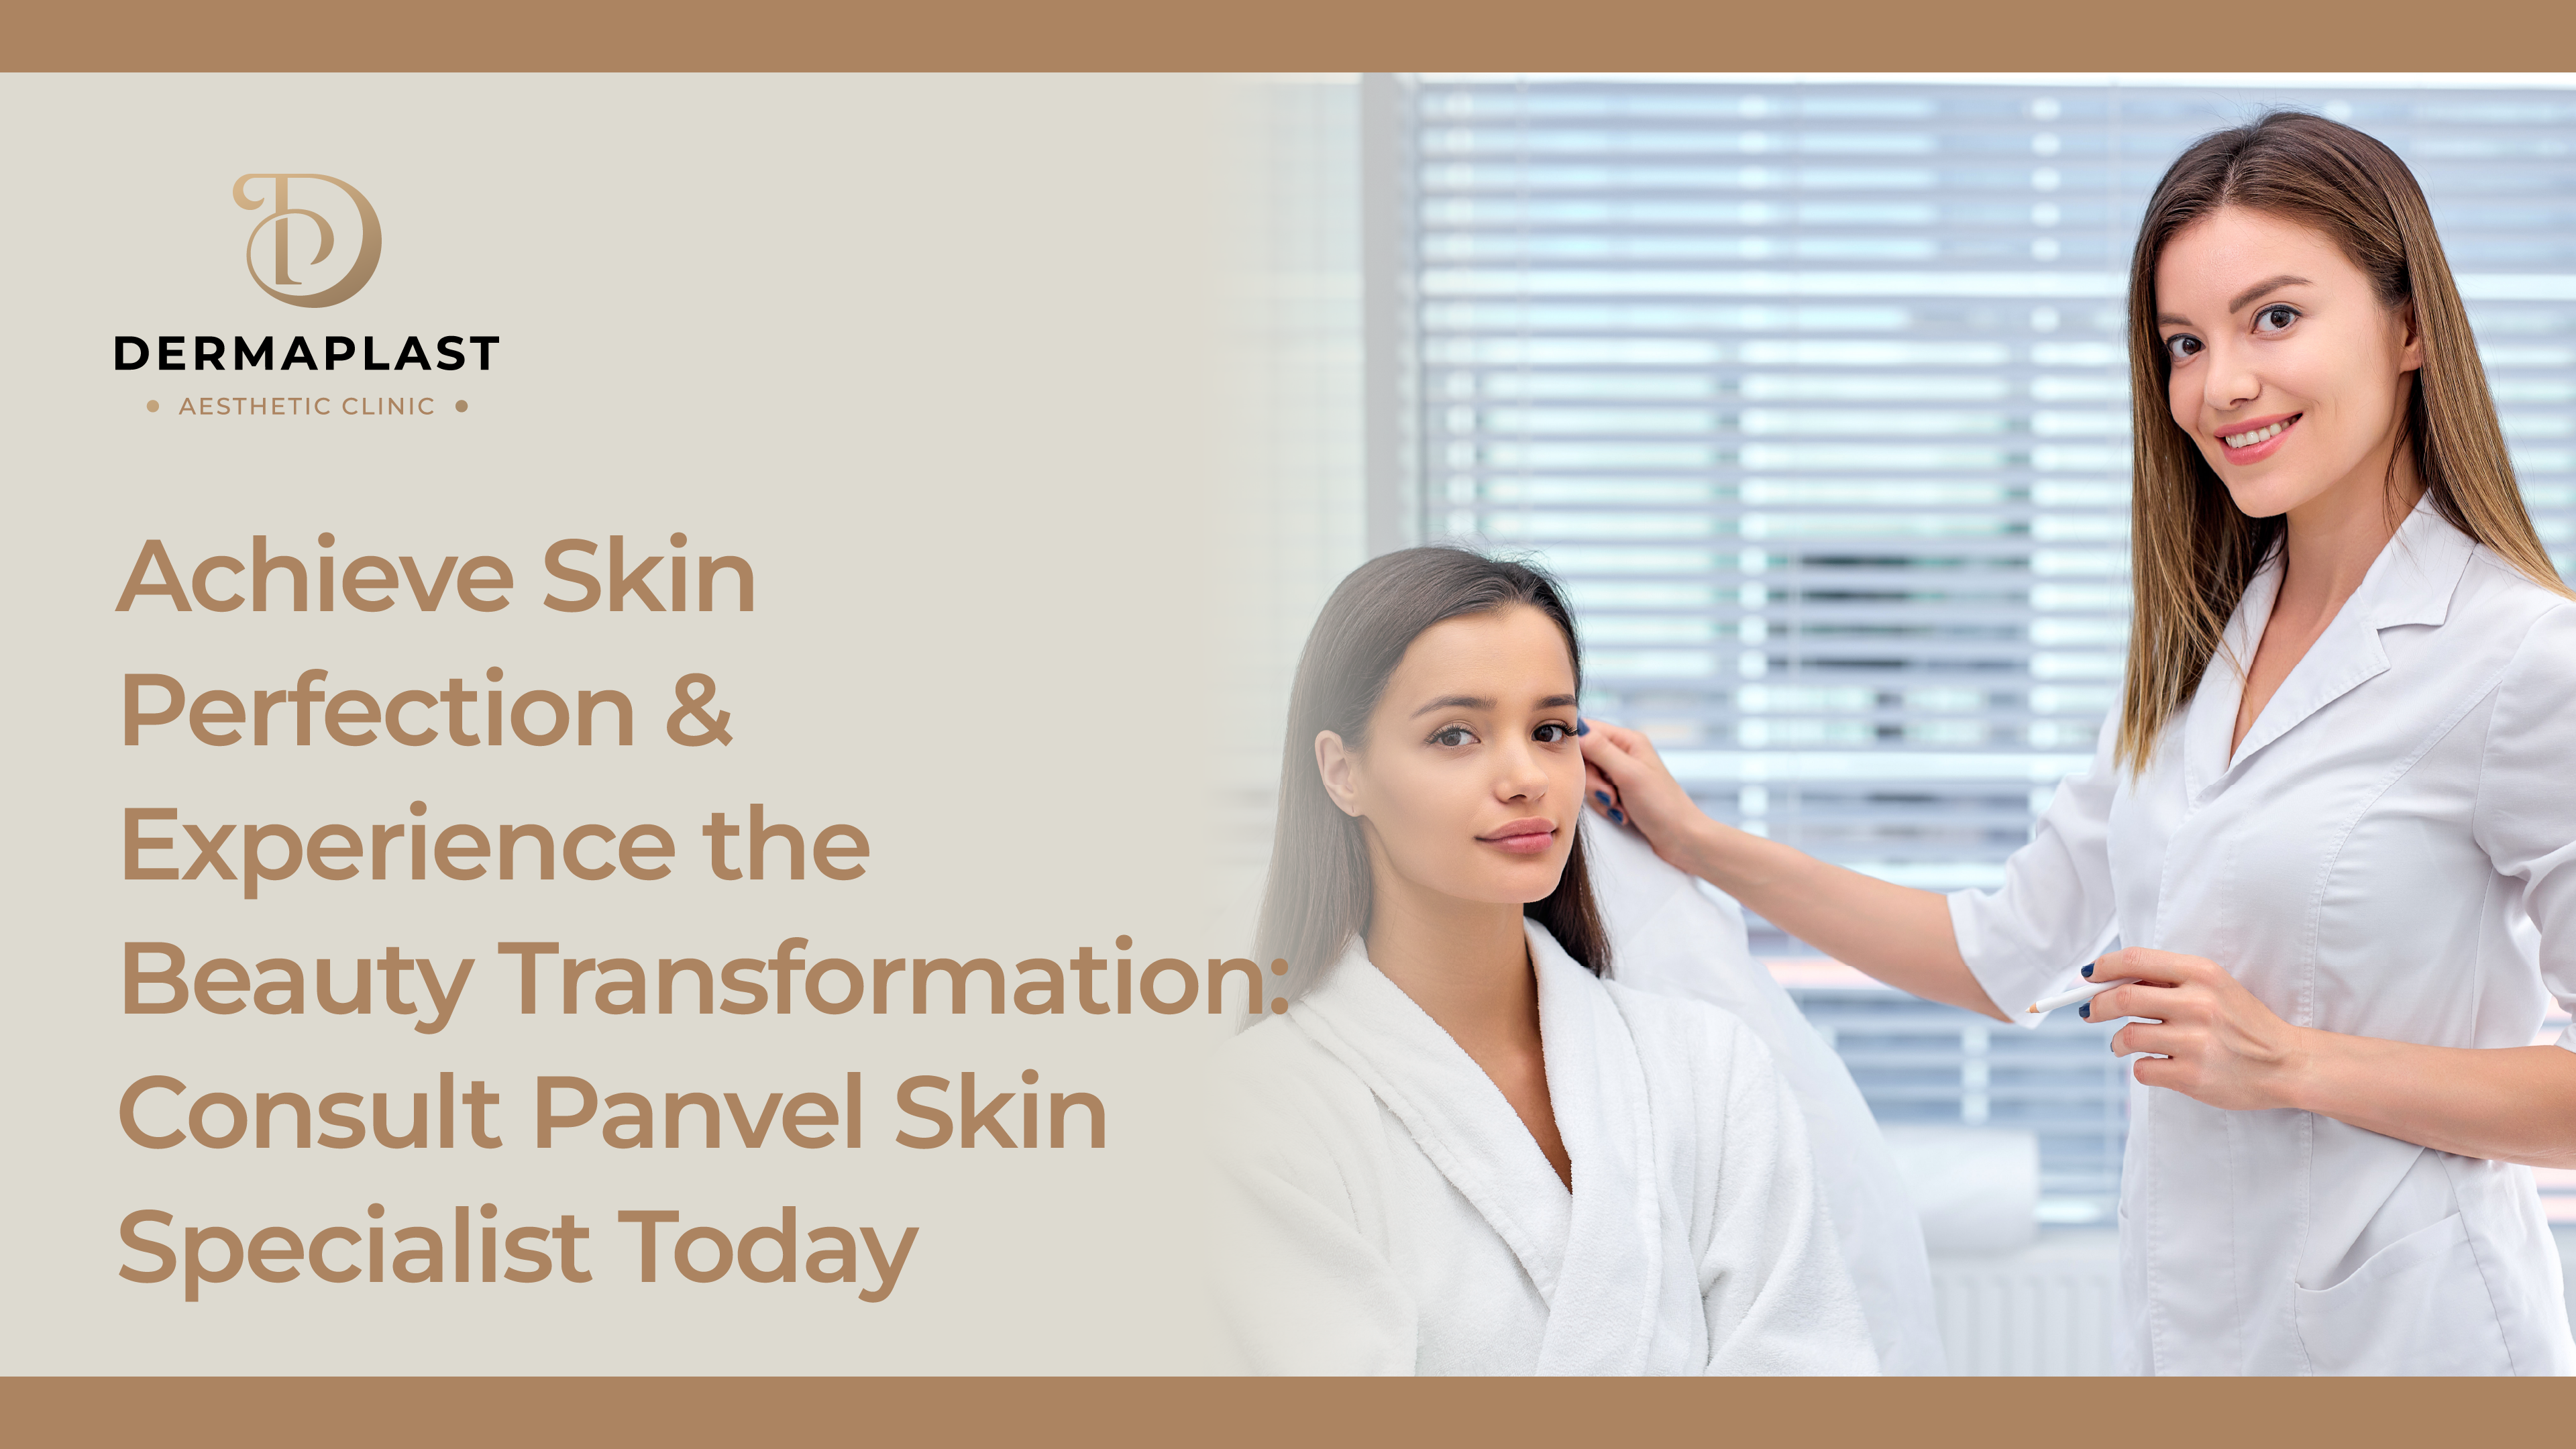 Achieve Skin perfection & experience the beauty transformation consult panvel skin specialist today